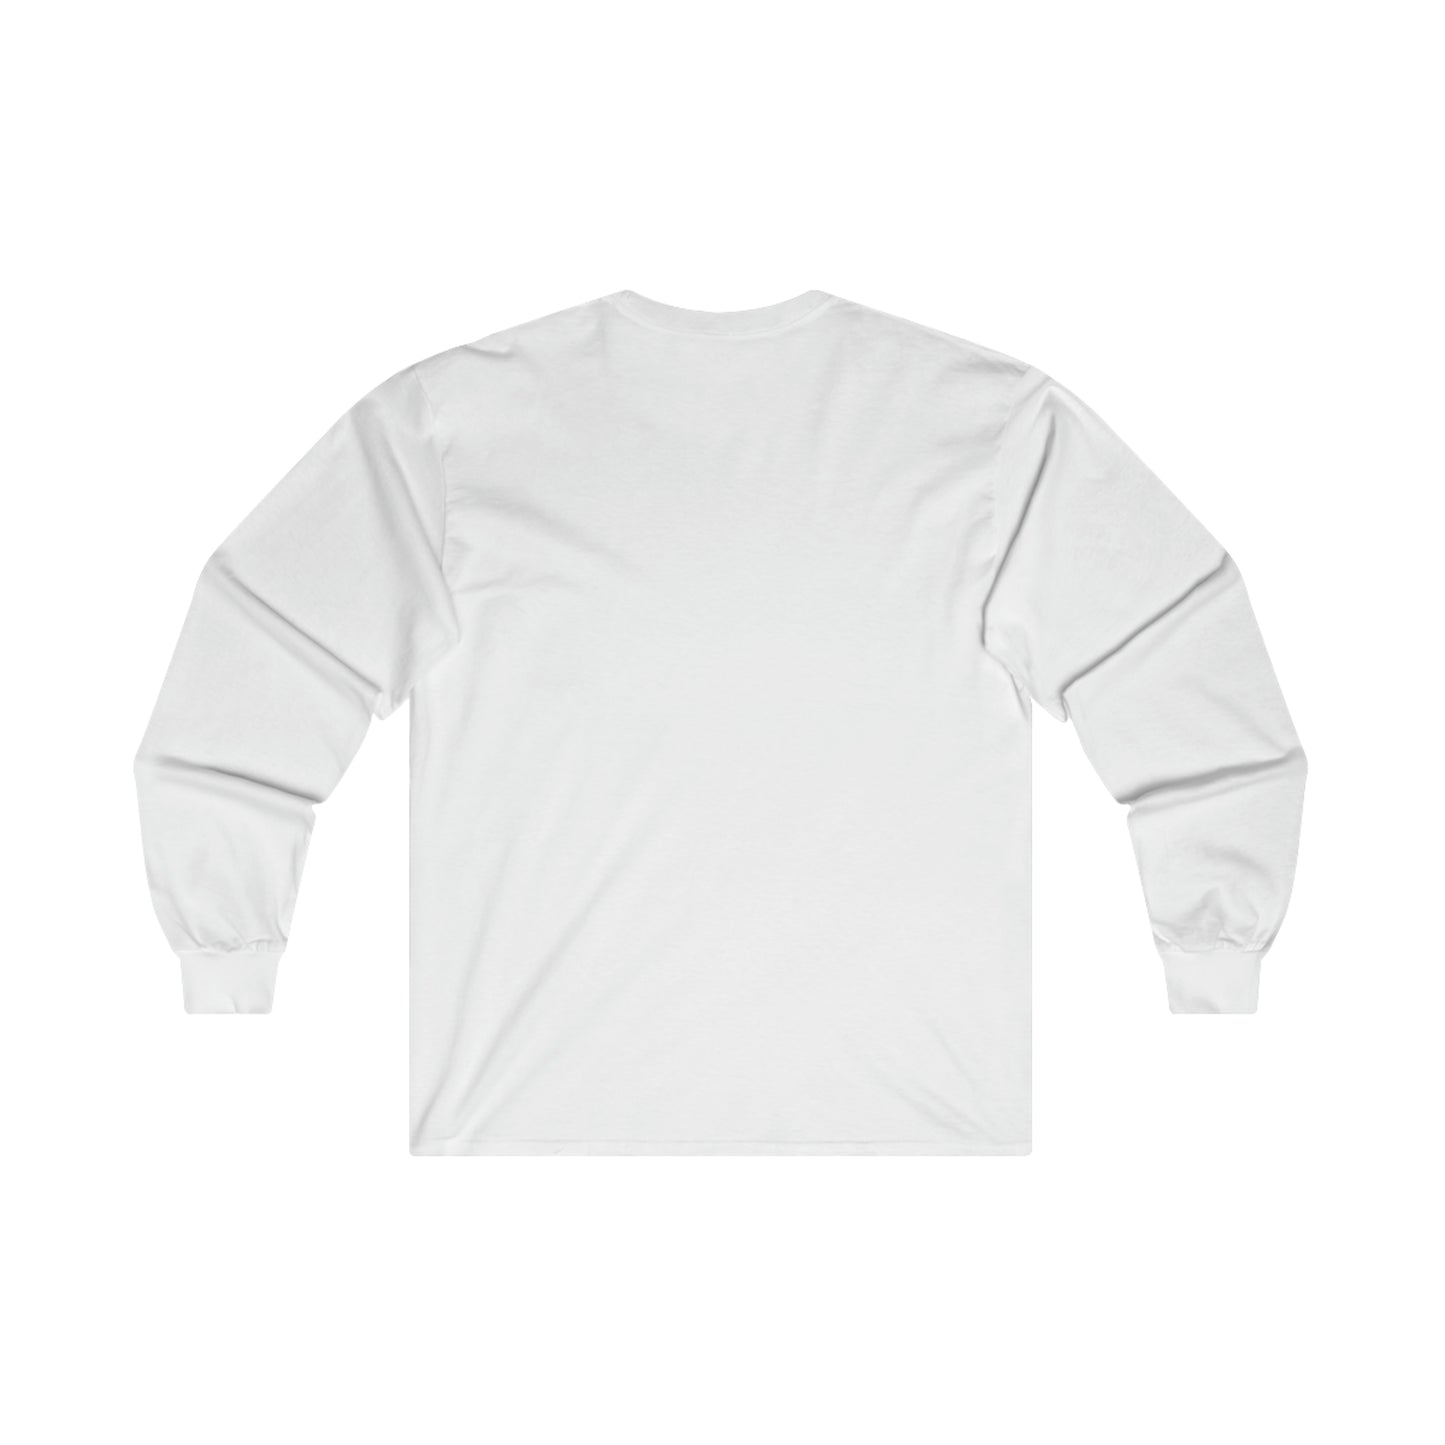 Romeo and Juliet Miller and Zyns - Ultra Cotton Long Sleeve Tee